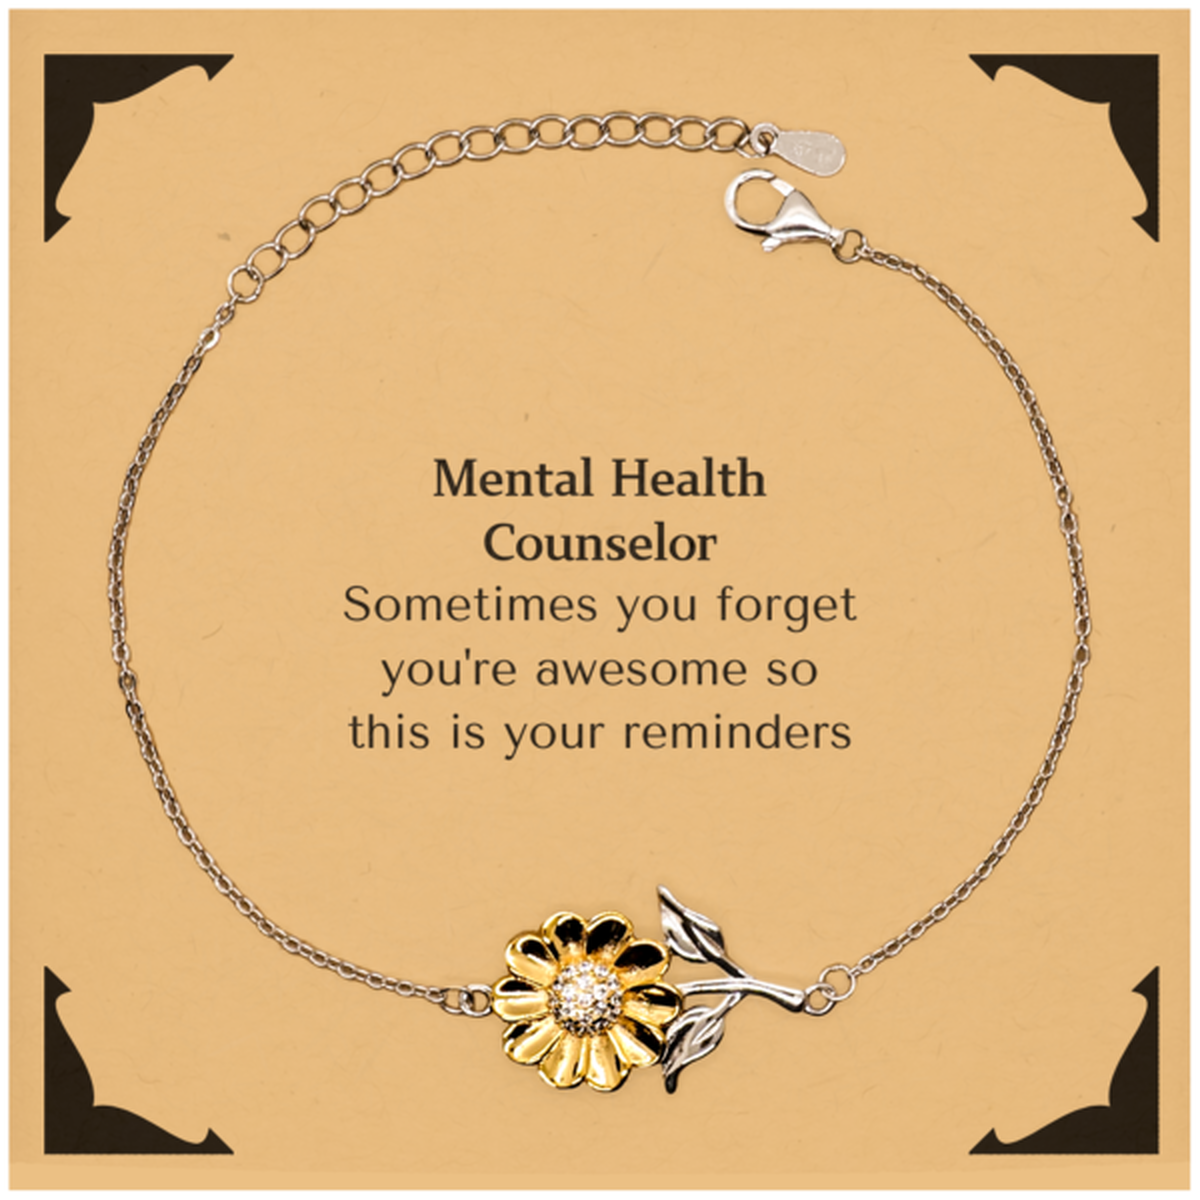 Sentimental Mental Health Counselor Sunflower Bracelet, Mental Health Counselor Sometimes you forget you're awesome so this is your reminders, Graduation Christmas Birthday Gifts for Mental Health Counselor, Men, Women, Coworkers